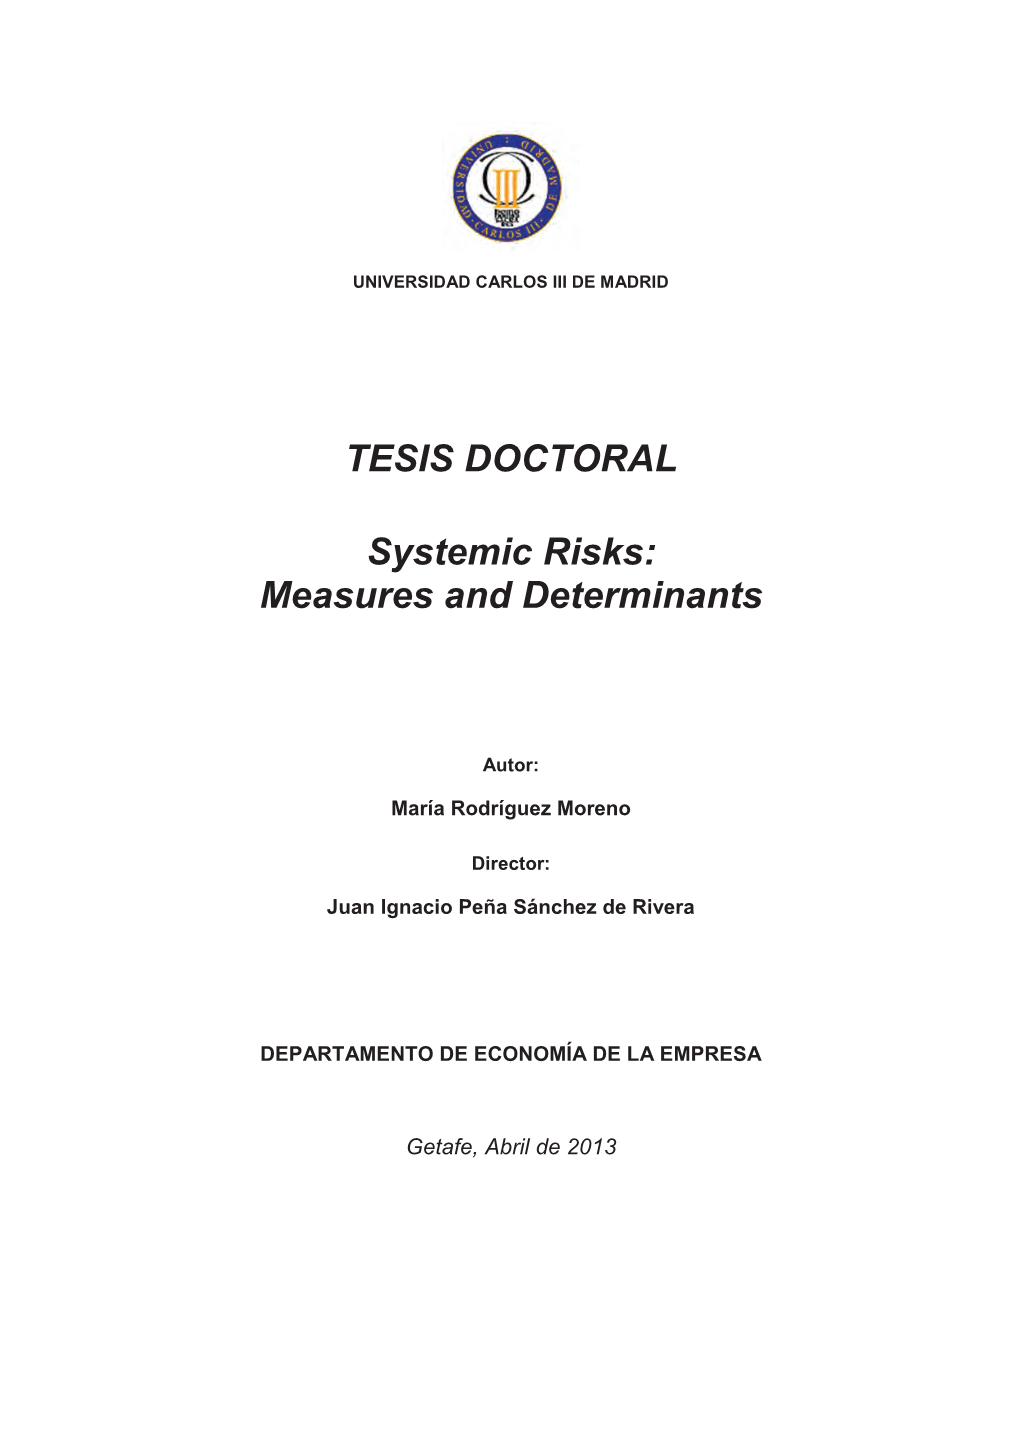 Systemic Risk: Measures and Determinants